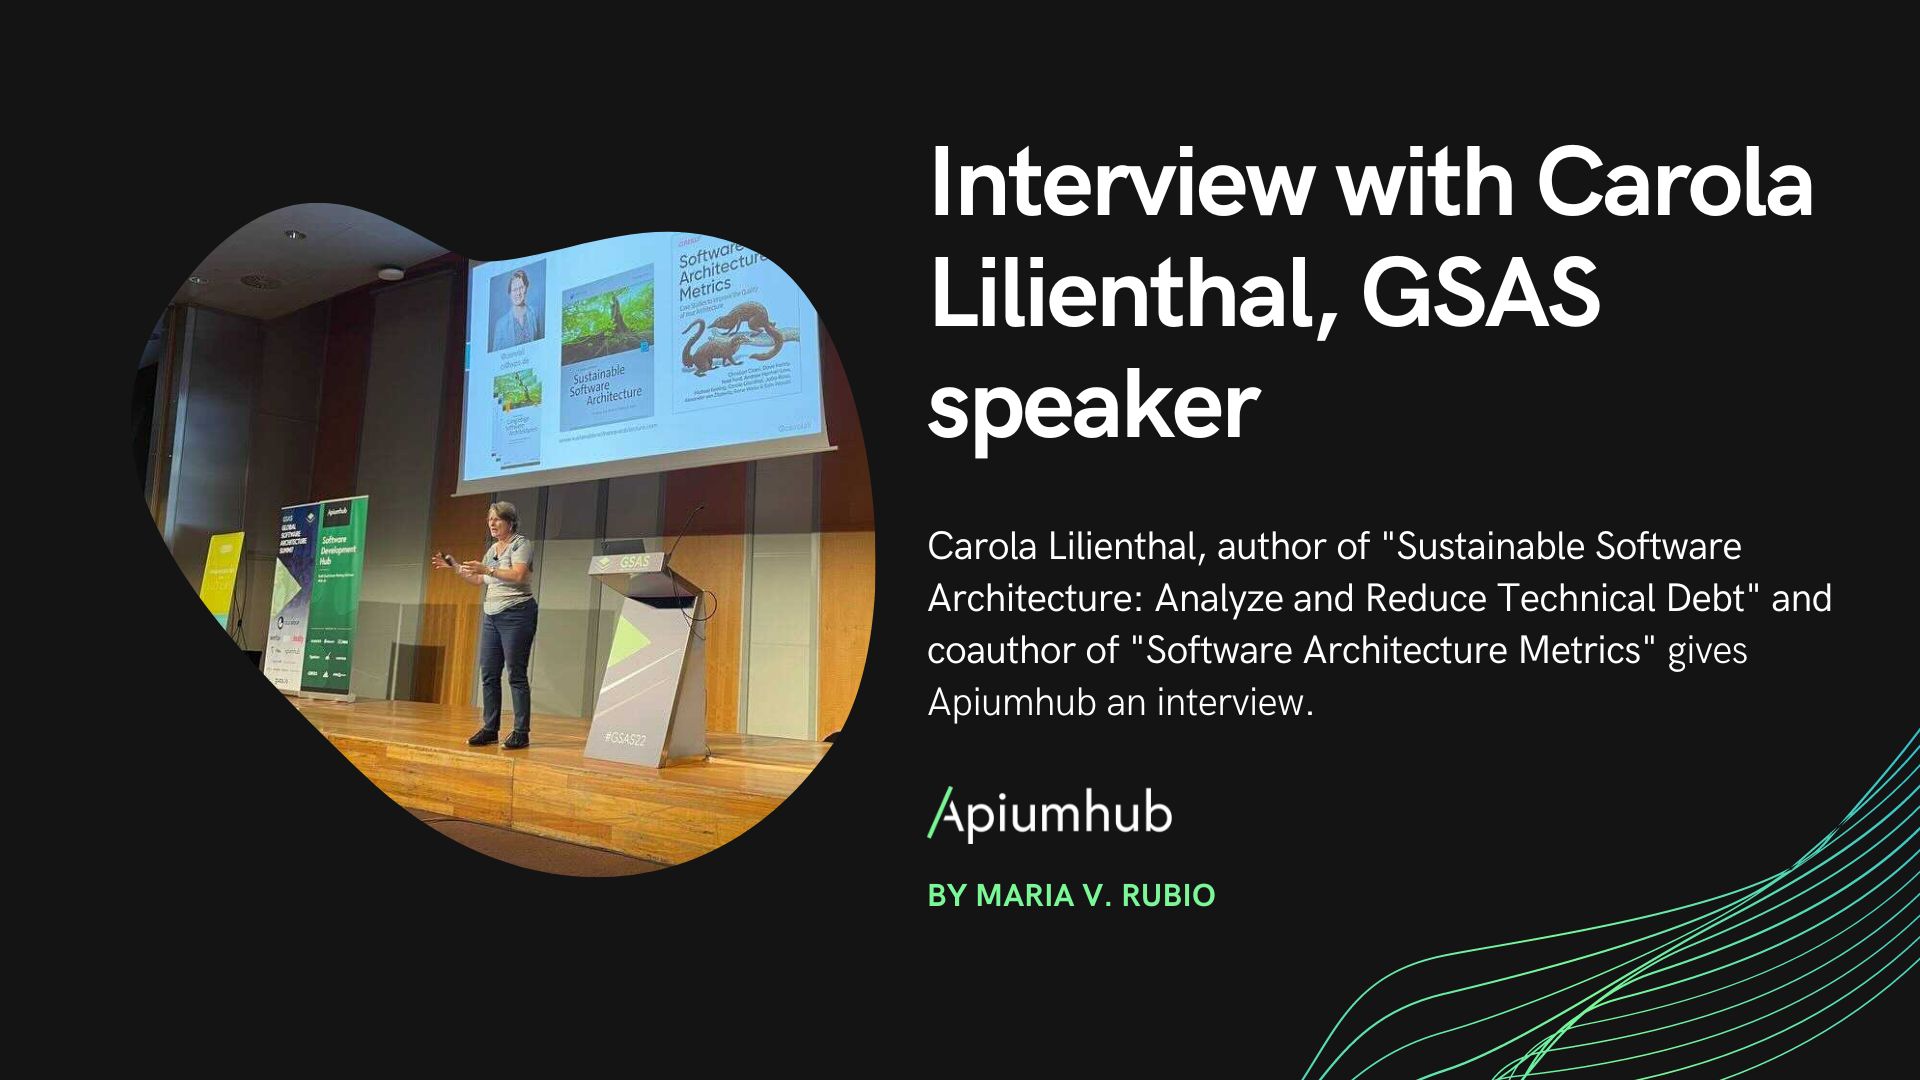 Carola Lilienthal gets interviewed at the Global Software Architecture Summit